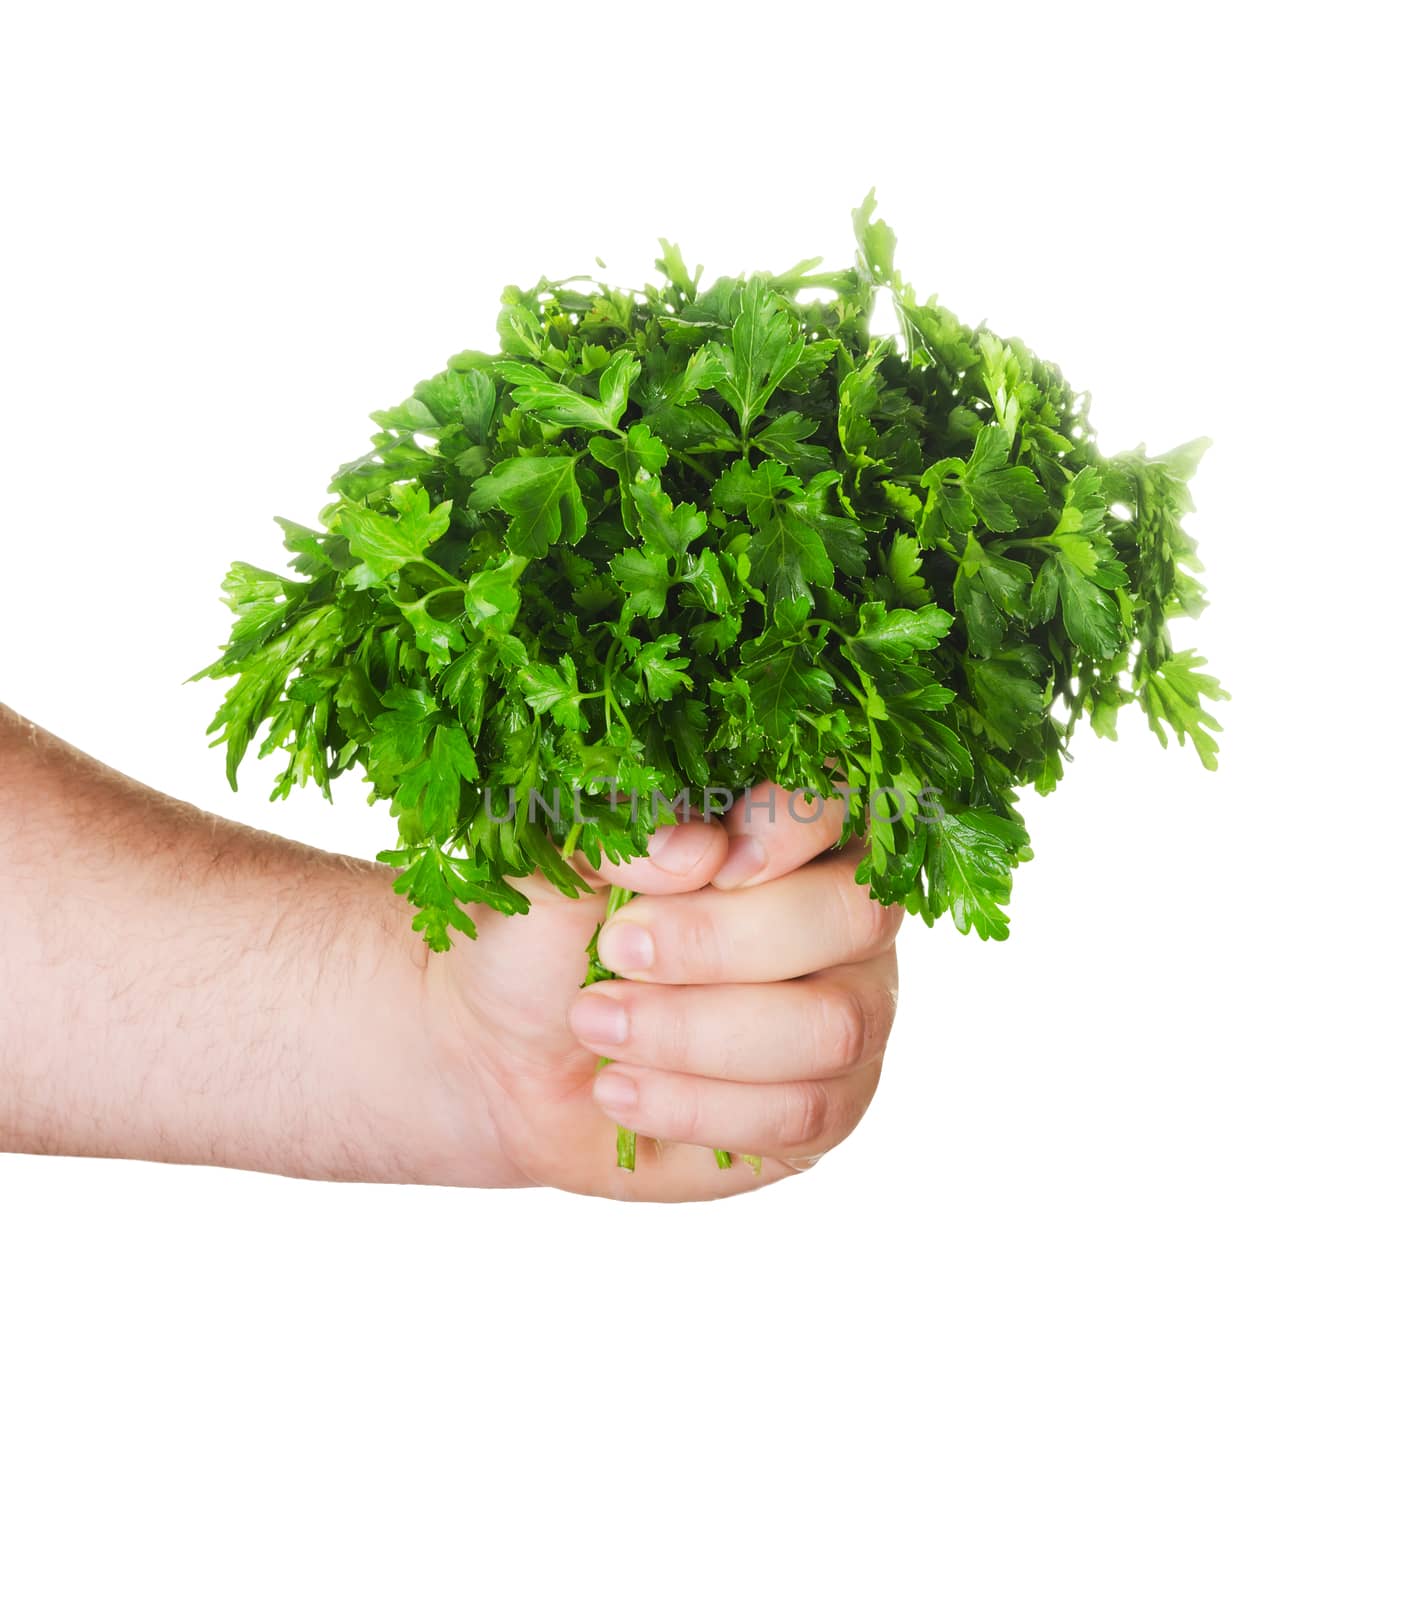 man's hand holding a bunch of parsley  by iprachenko